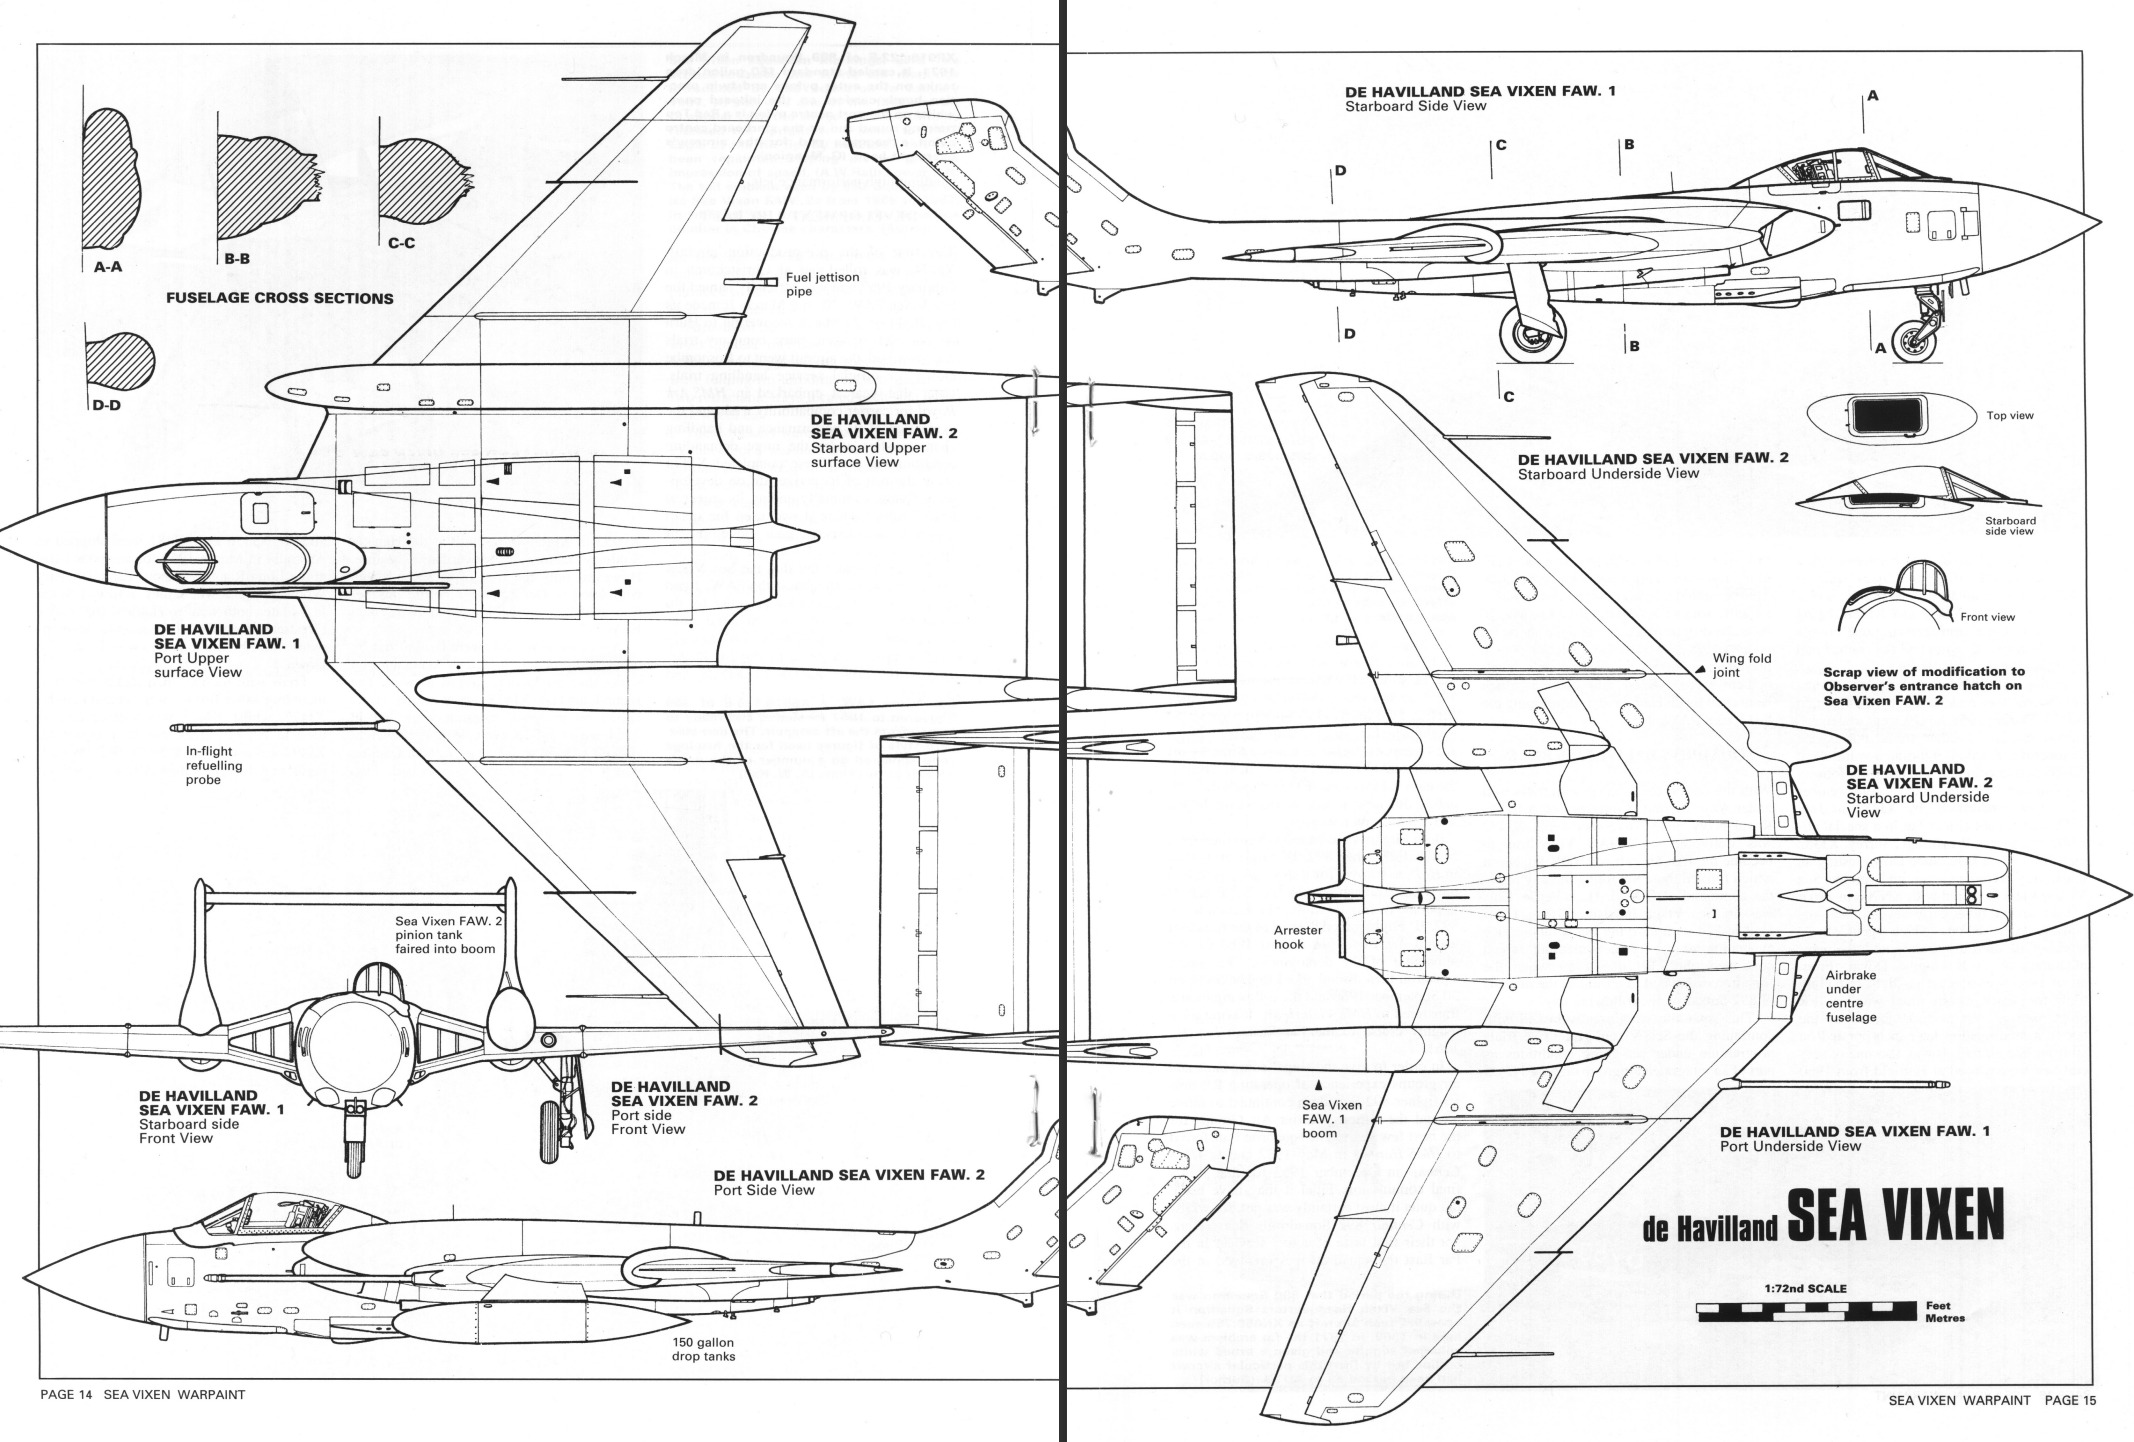 Share ultra-fine aircraft structure drawing (35) - iNEWS